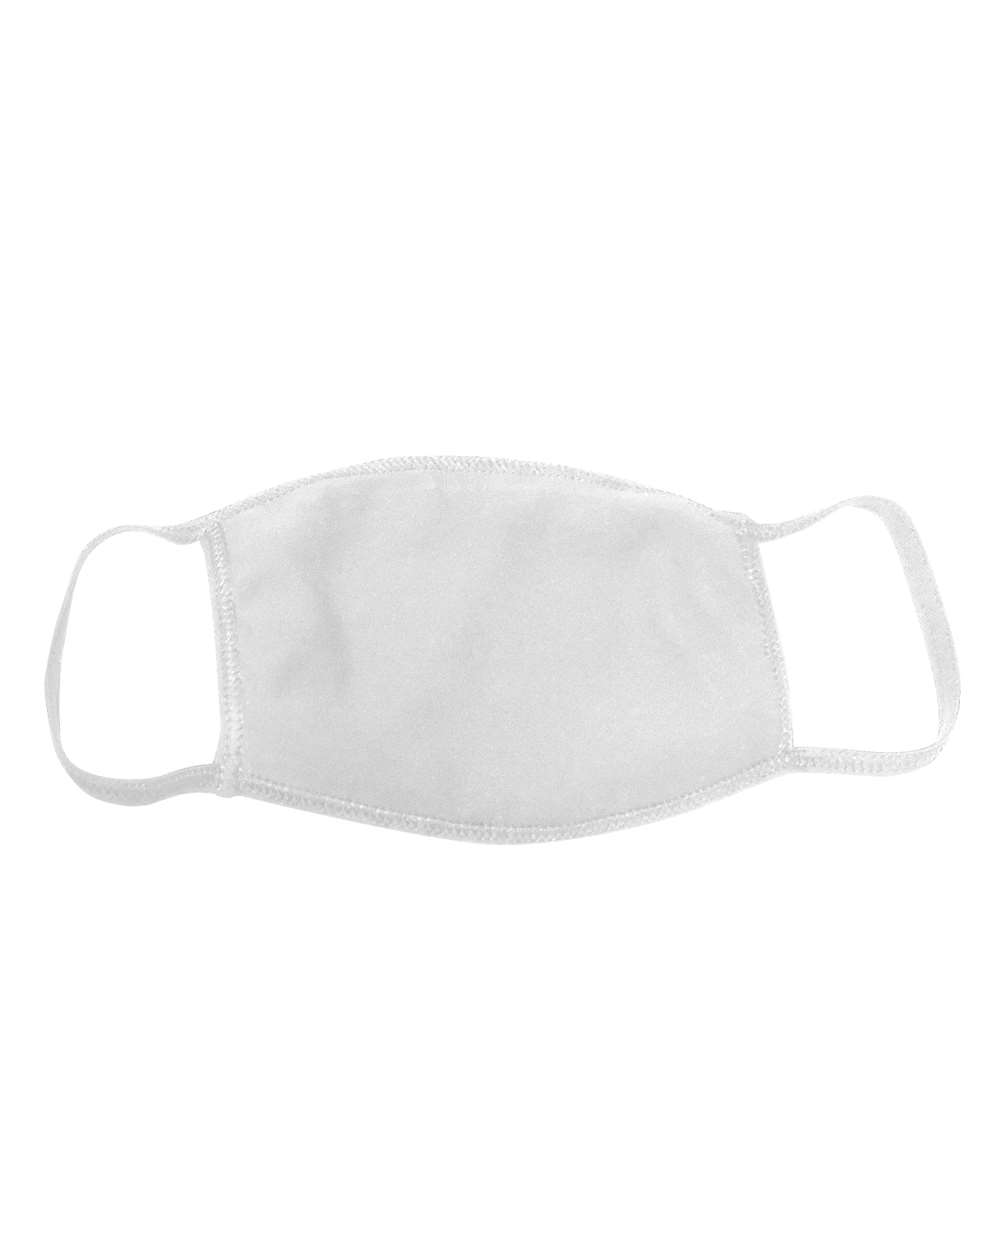 Bayside 1900 - USA-Made 100% Cotton Face Mask 25/PACK